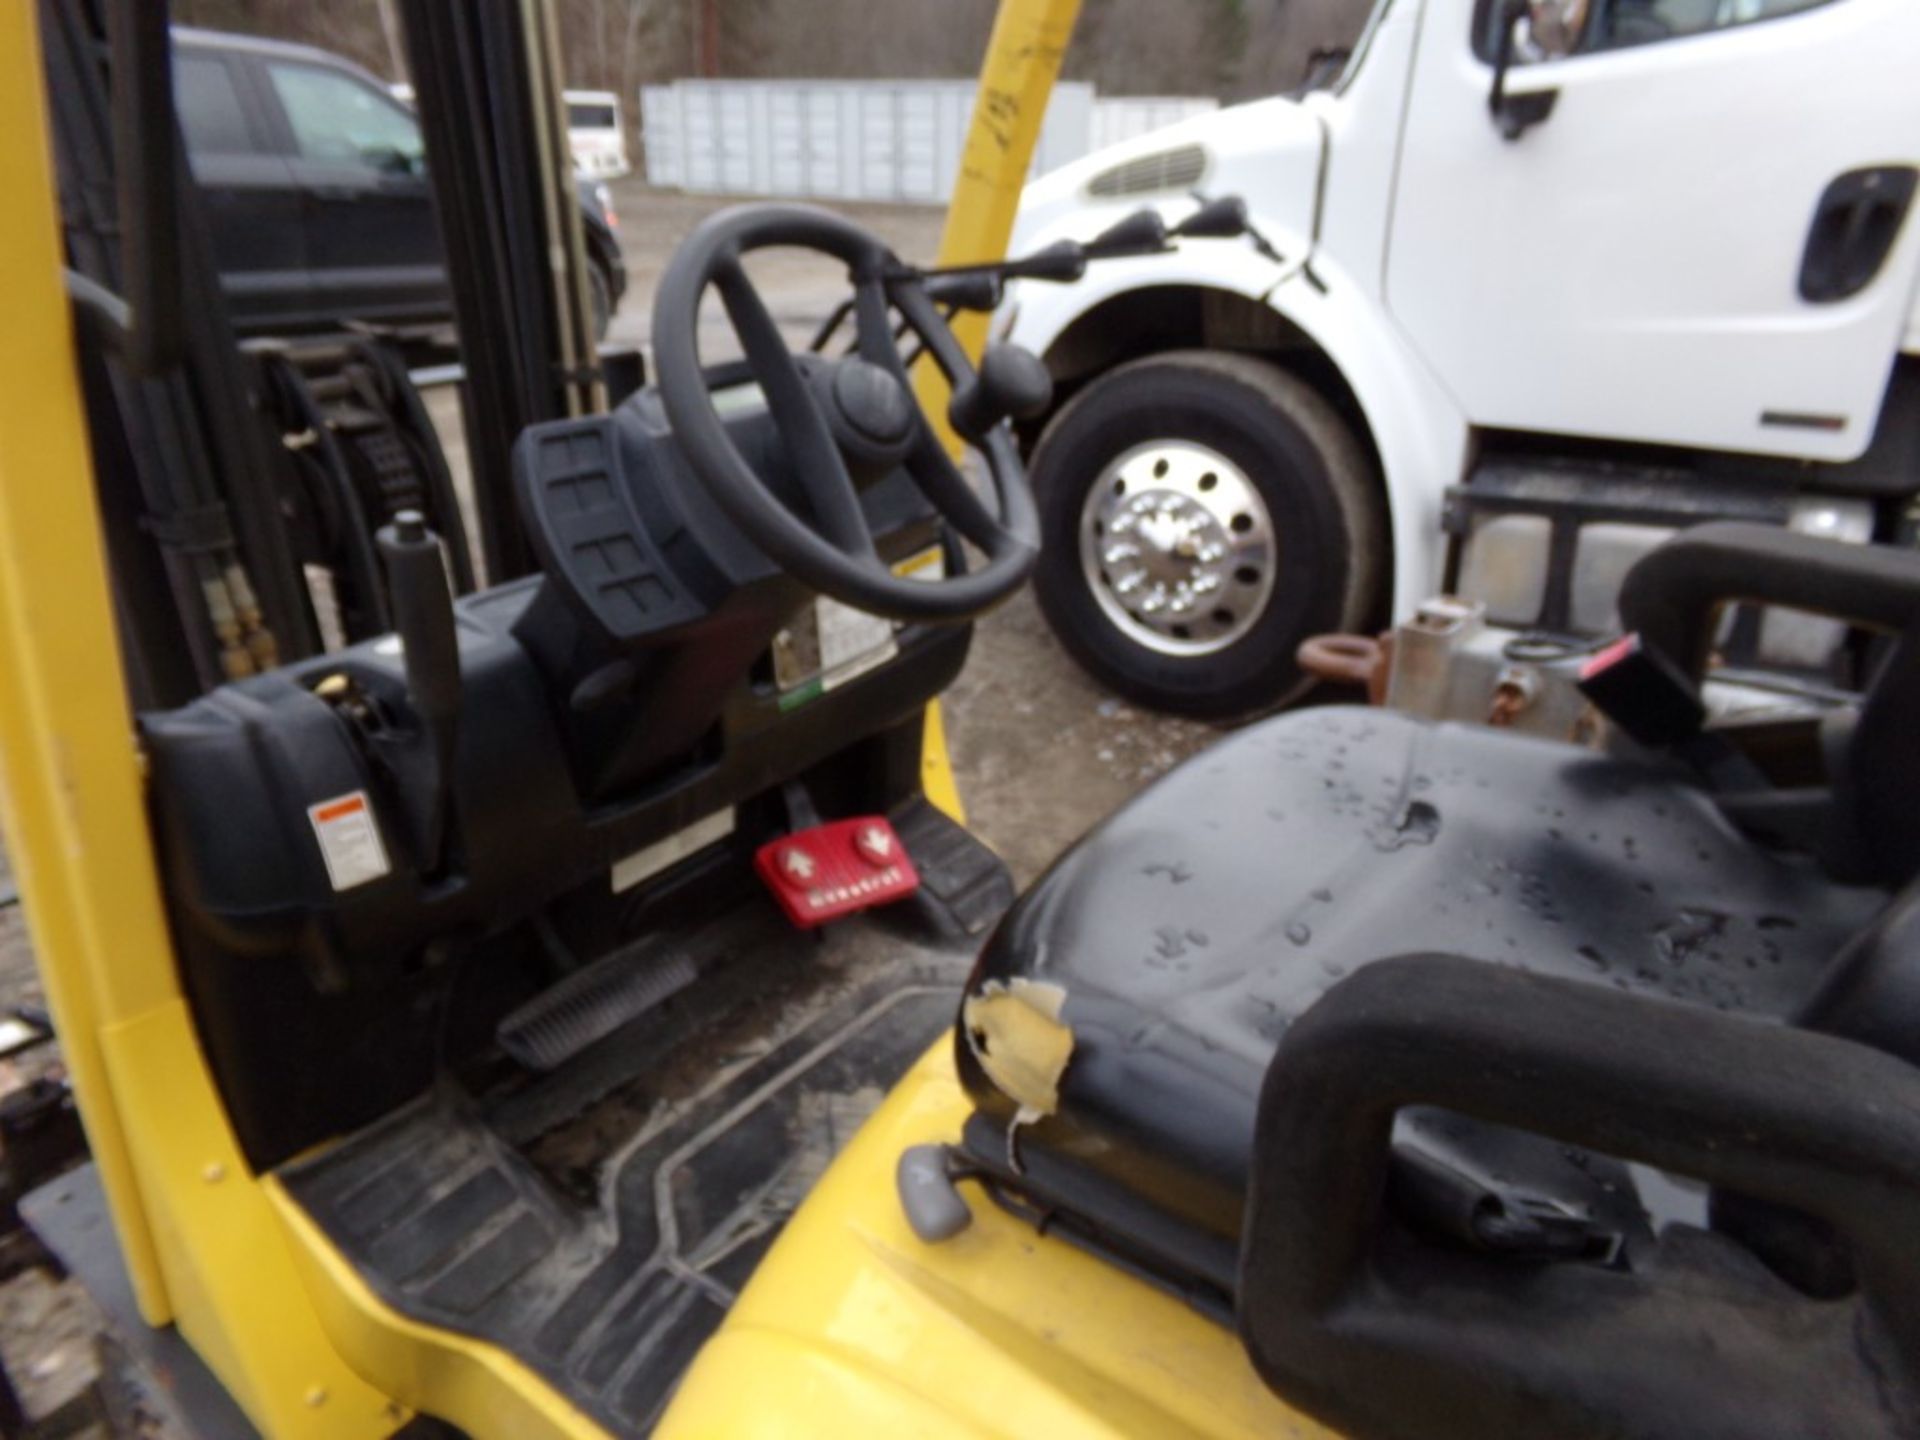 Hyster Fortis 40 Propane Indoor Forklift, 2609 Hrs., Truck Wt. 7410, Lift Capacity 3,650, NO Propane - Image 4 of 4